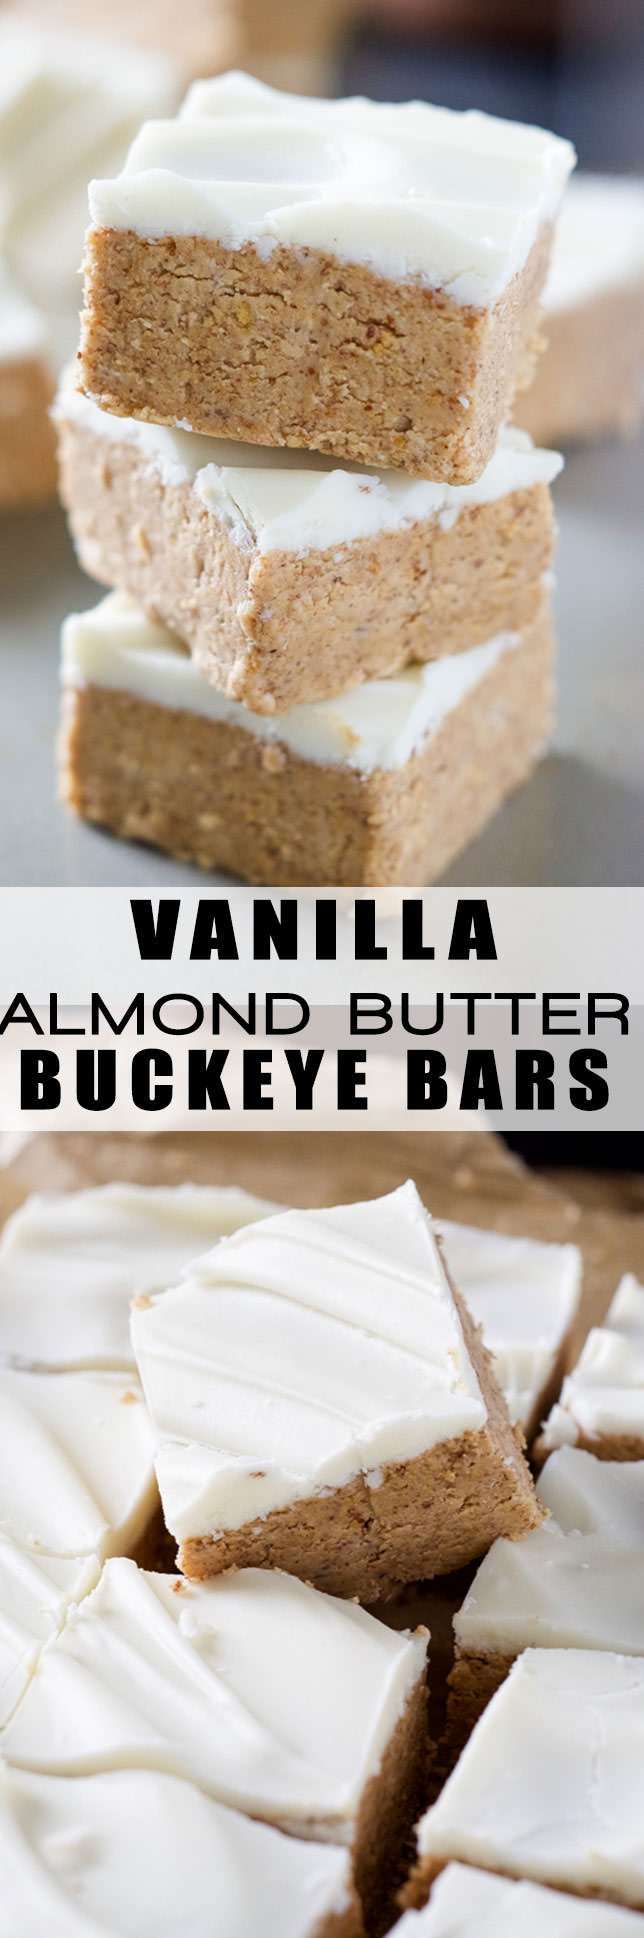 An update to the classic recipe, Vanilla Almond Butter Buckeye Bars are filled with creamy almond butter and coated in a creamy white chocolate coating! The hardest part is waiting for them to chill!